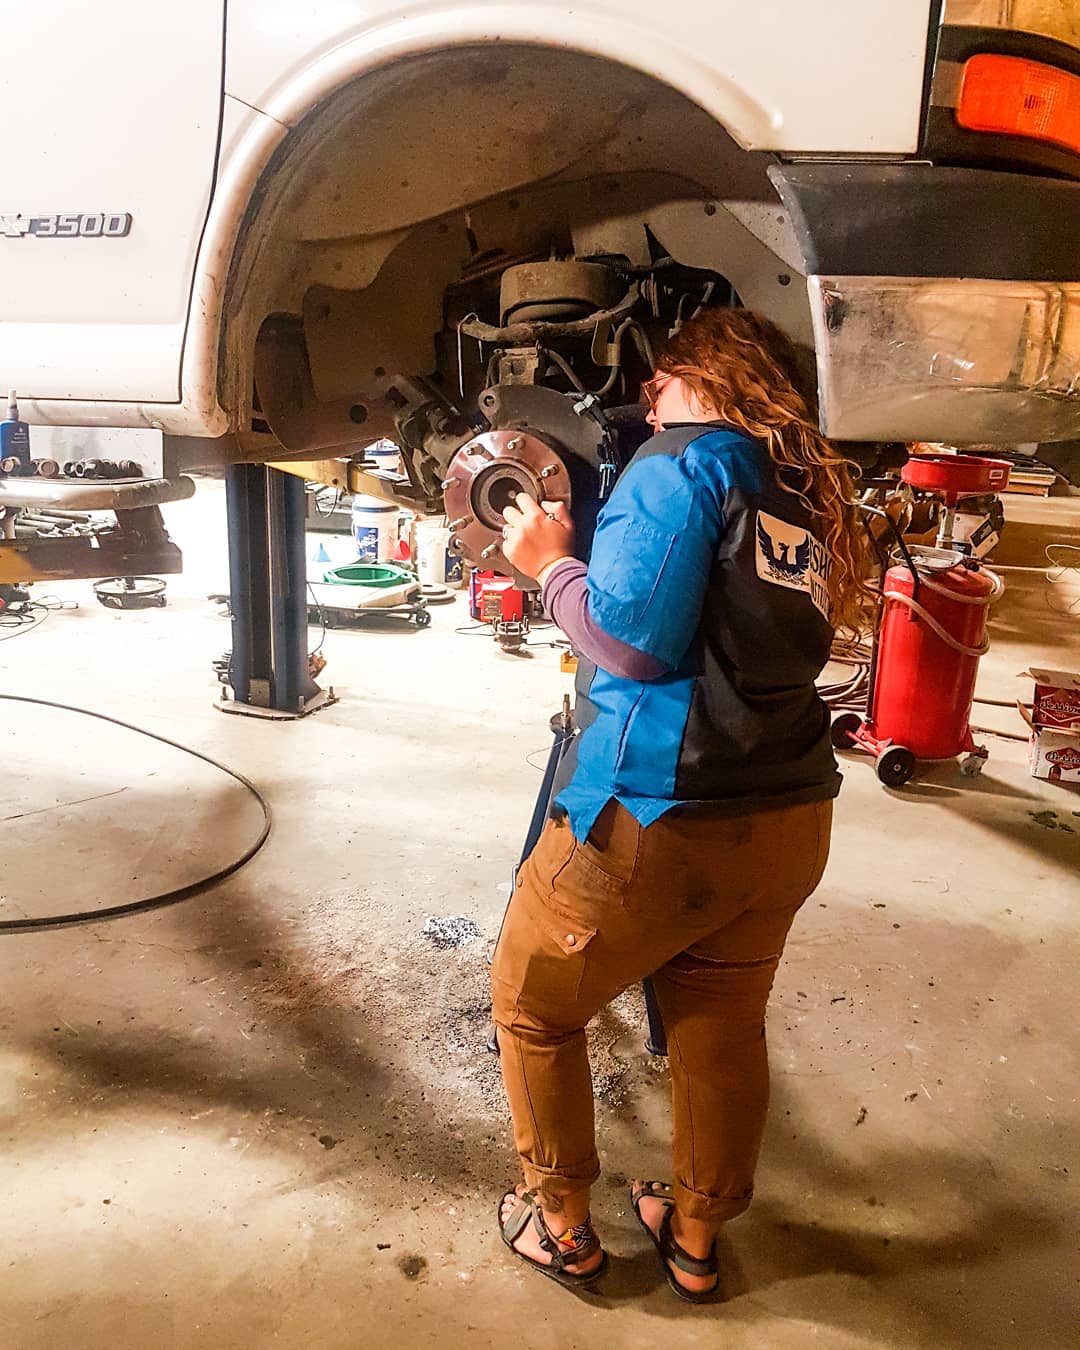 Girl fixing the tire on her van. Photo by Instagram user @practicalparadise